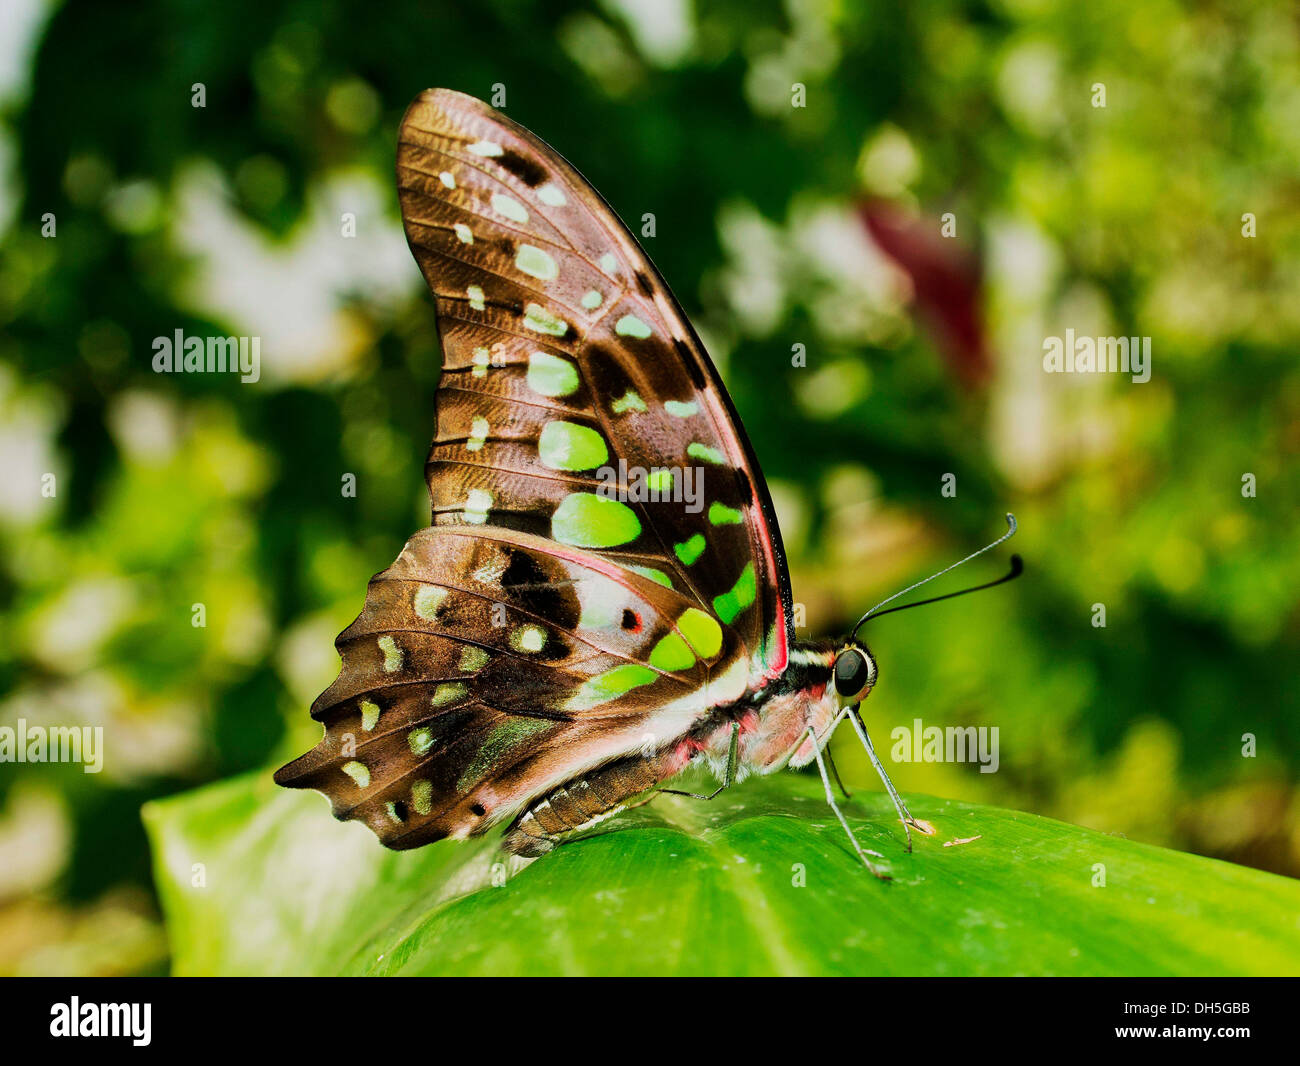 A South American swallowtail butterfly sitting on a leaf Stock Photo